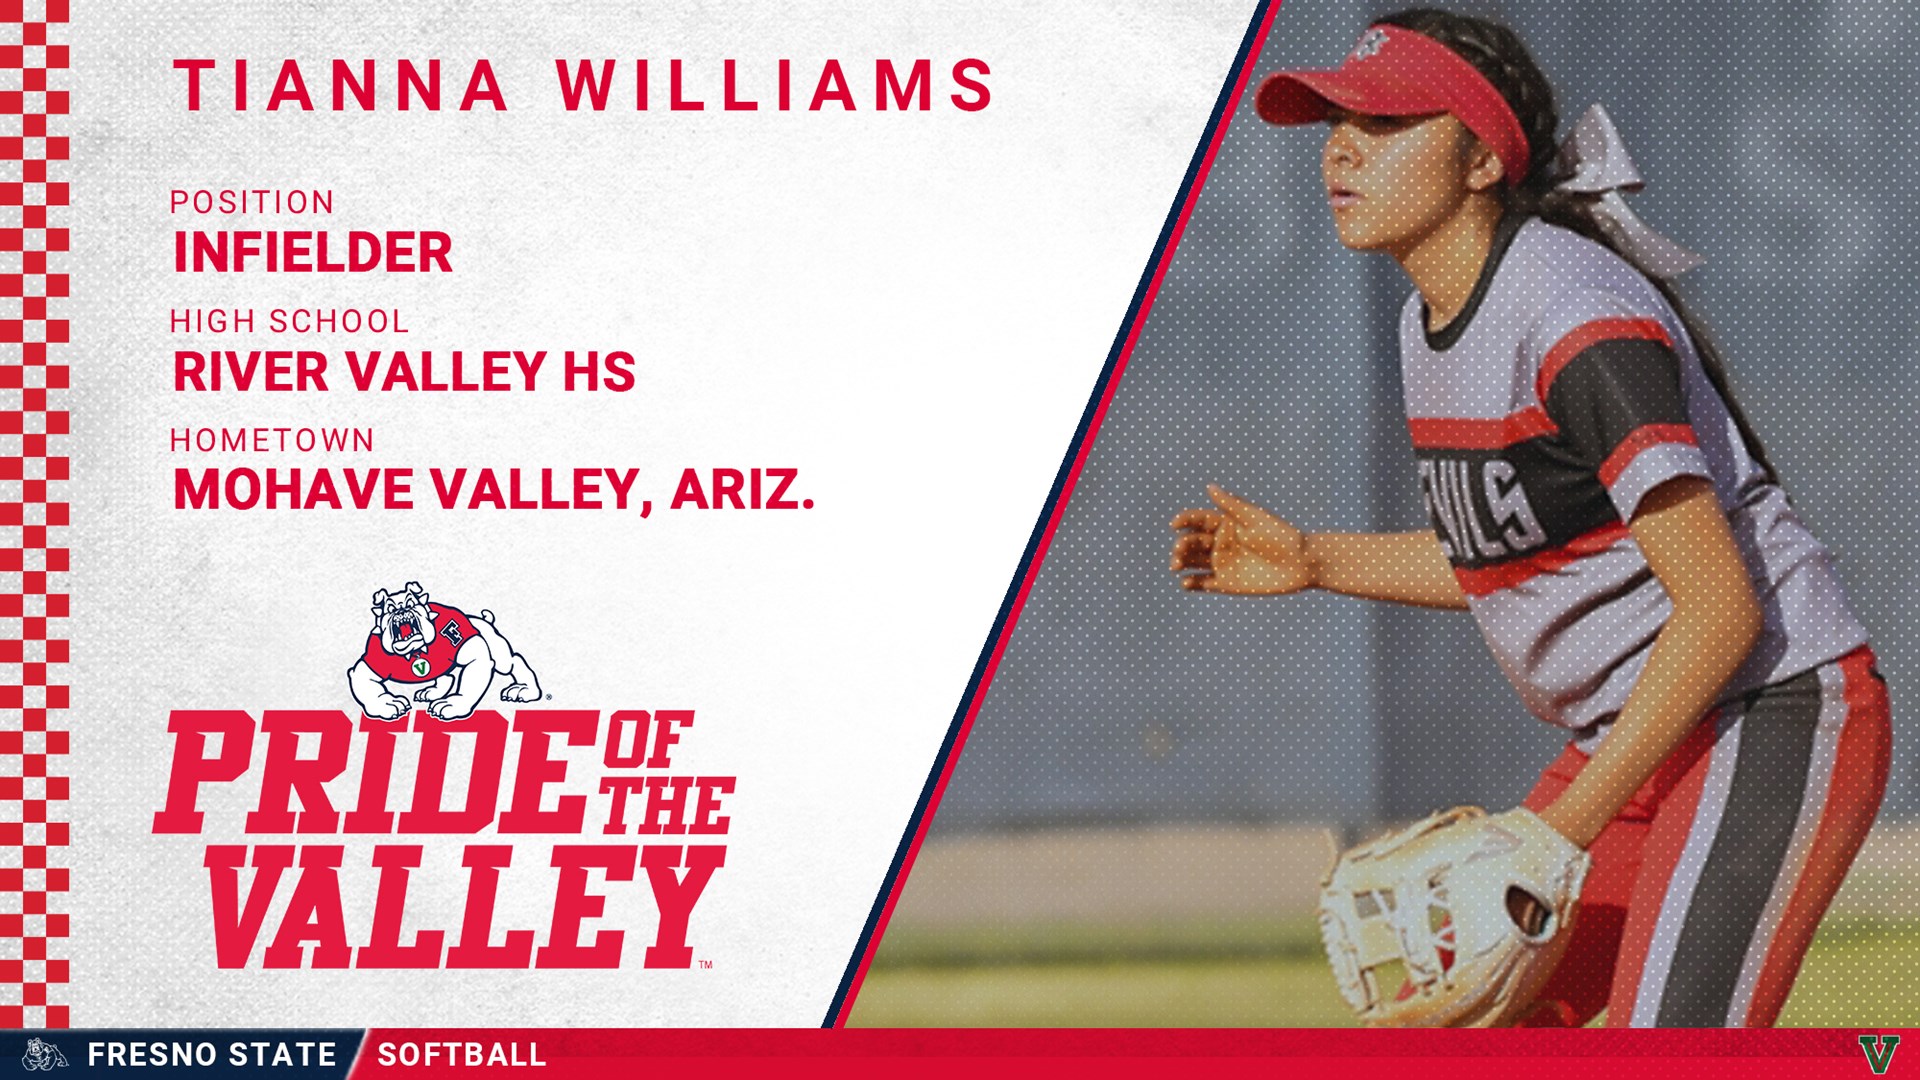 Tianna Williams (Fort Mojave Indian Tribe) joins incoming Fresno State University softball class